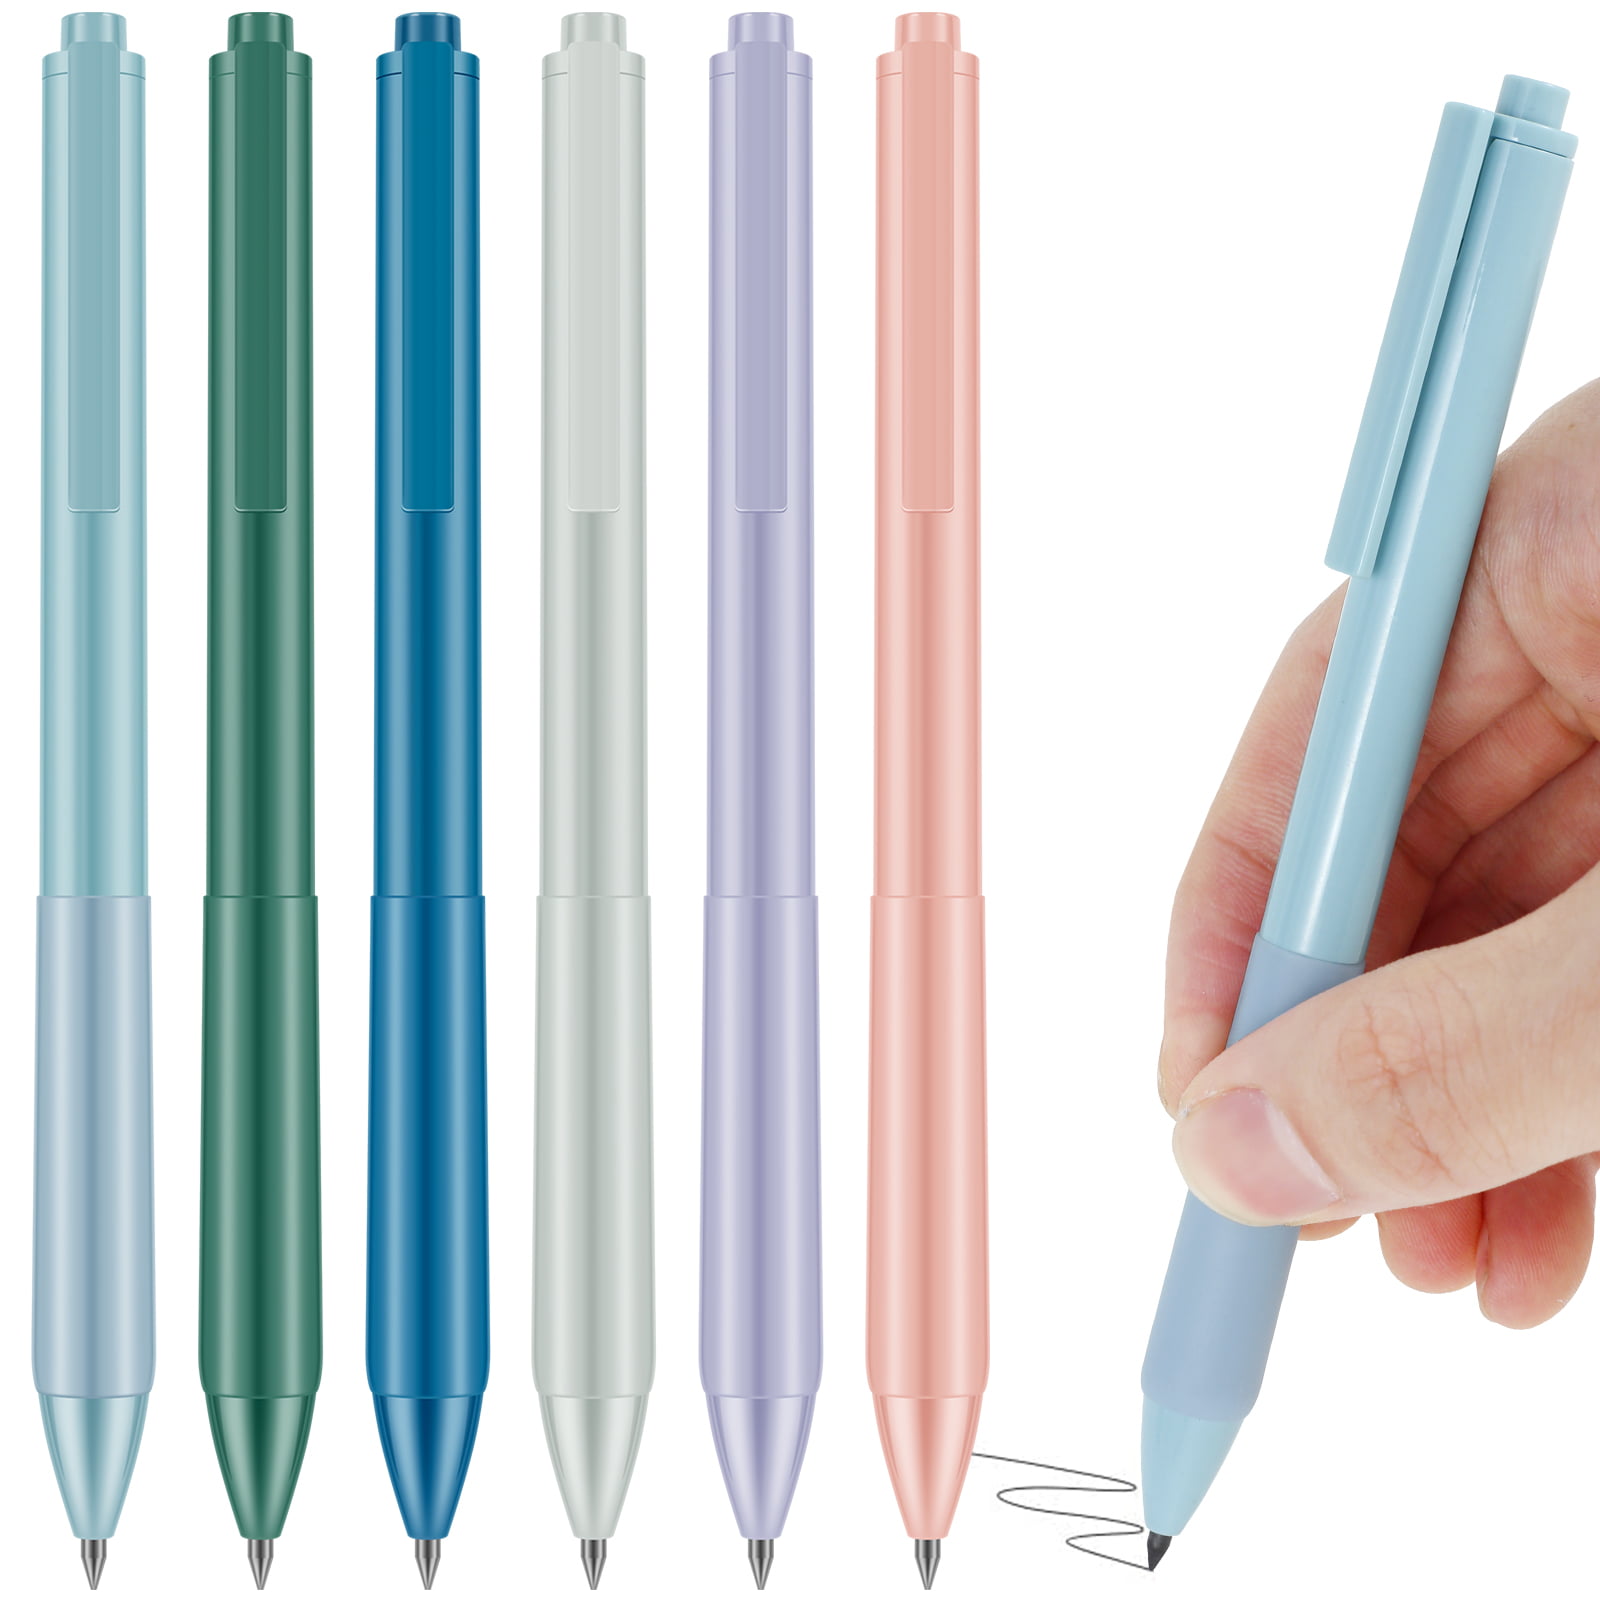 Topboutique Inkless Pencil,7PCS Everlasting Pencil Infinity Inkless Pencil with Extra 7 Eraser Reusable Everlasting Pencil with 7 Replaceable Nibs